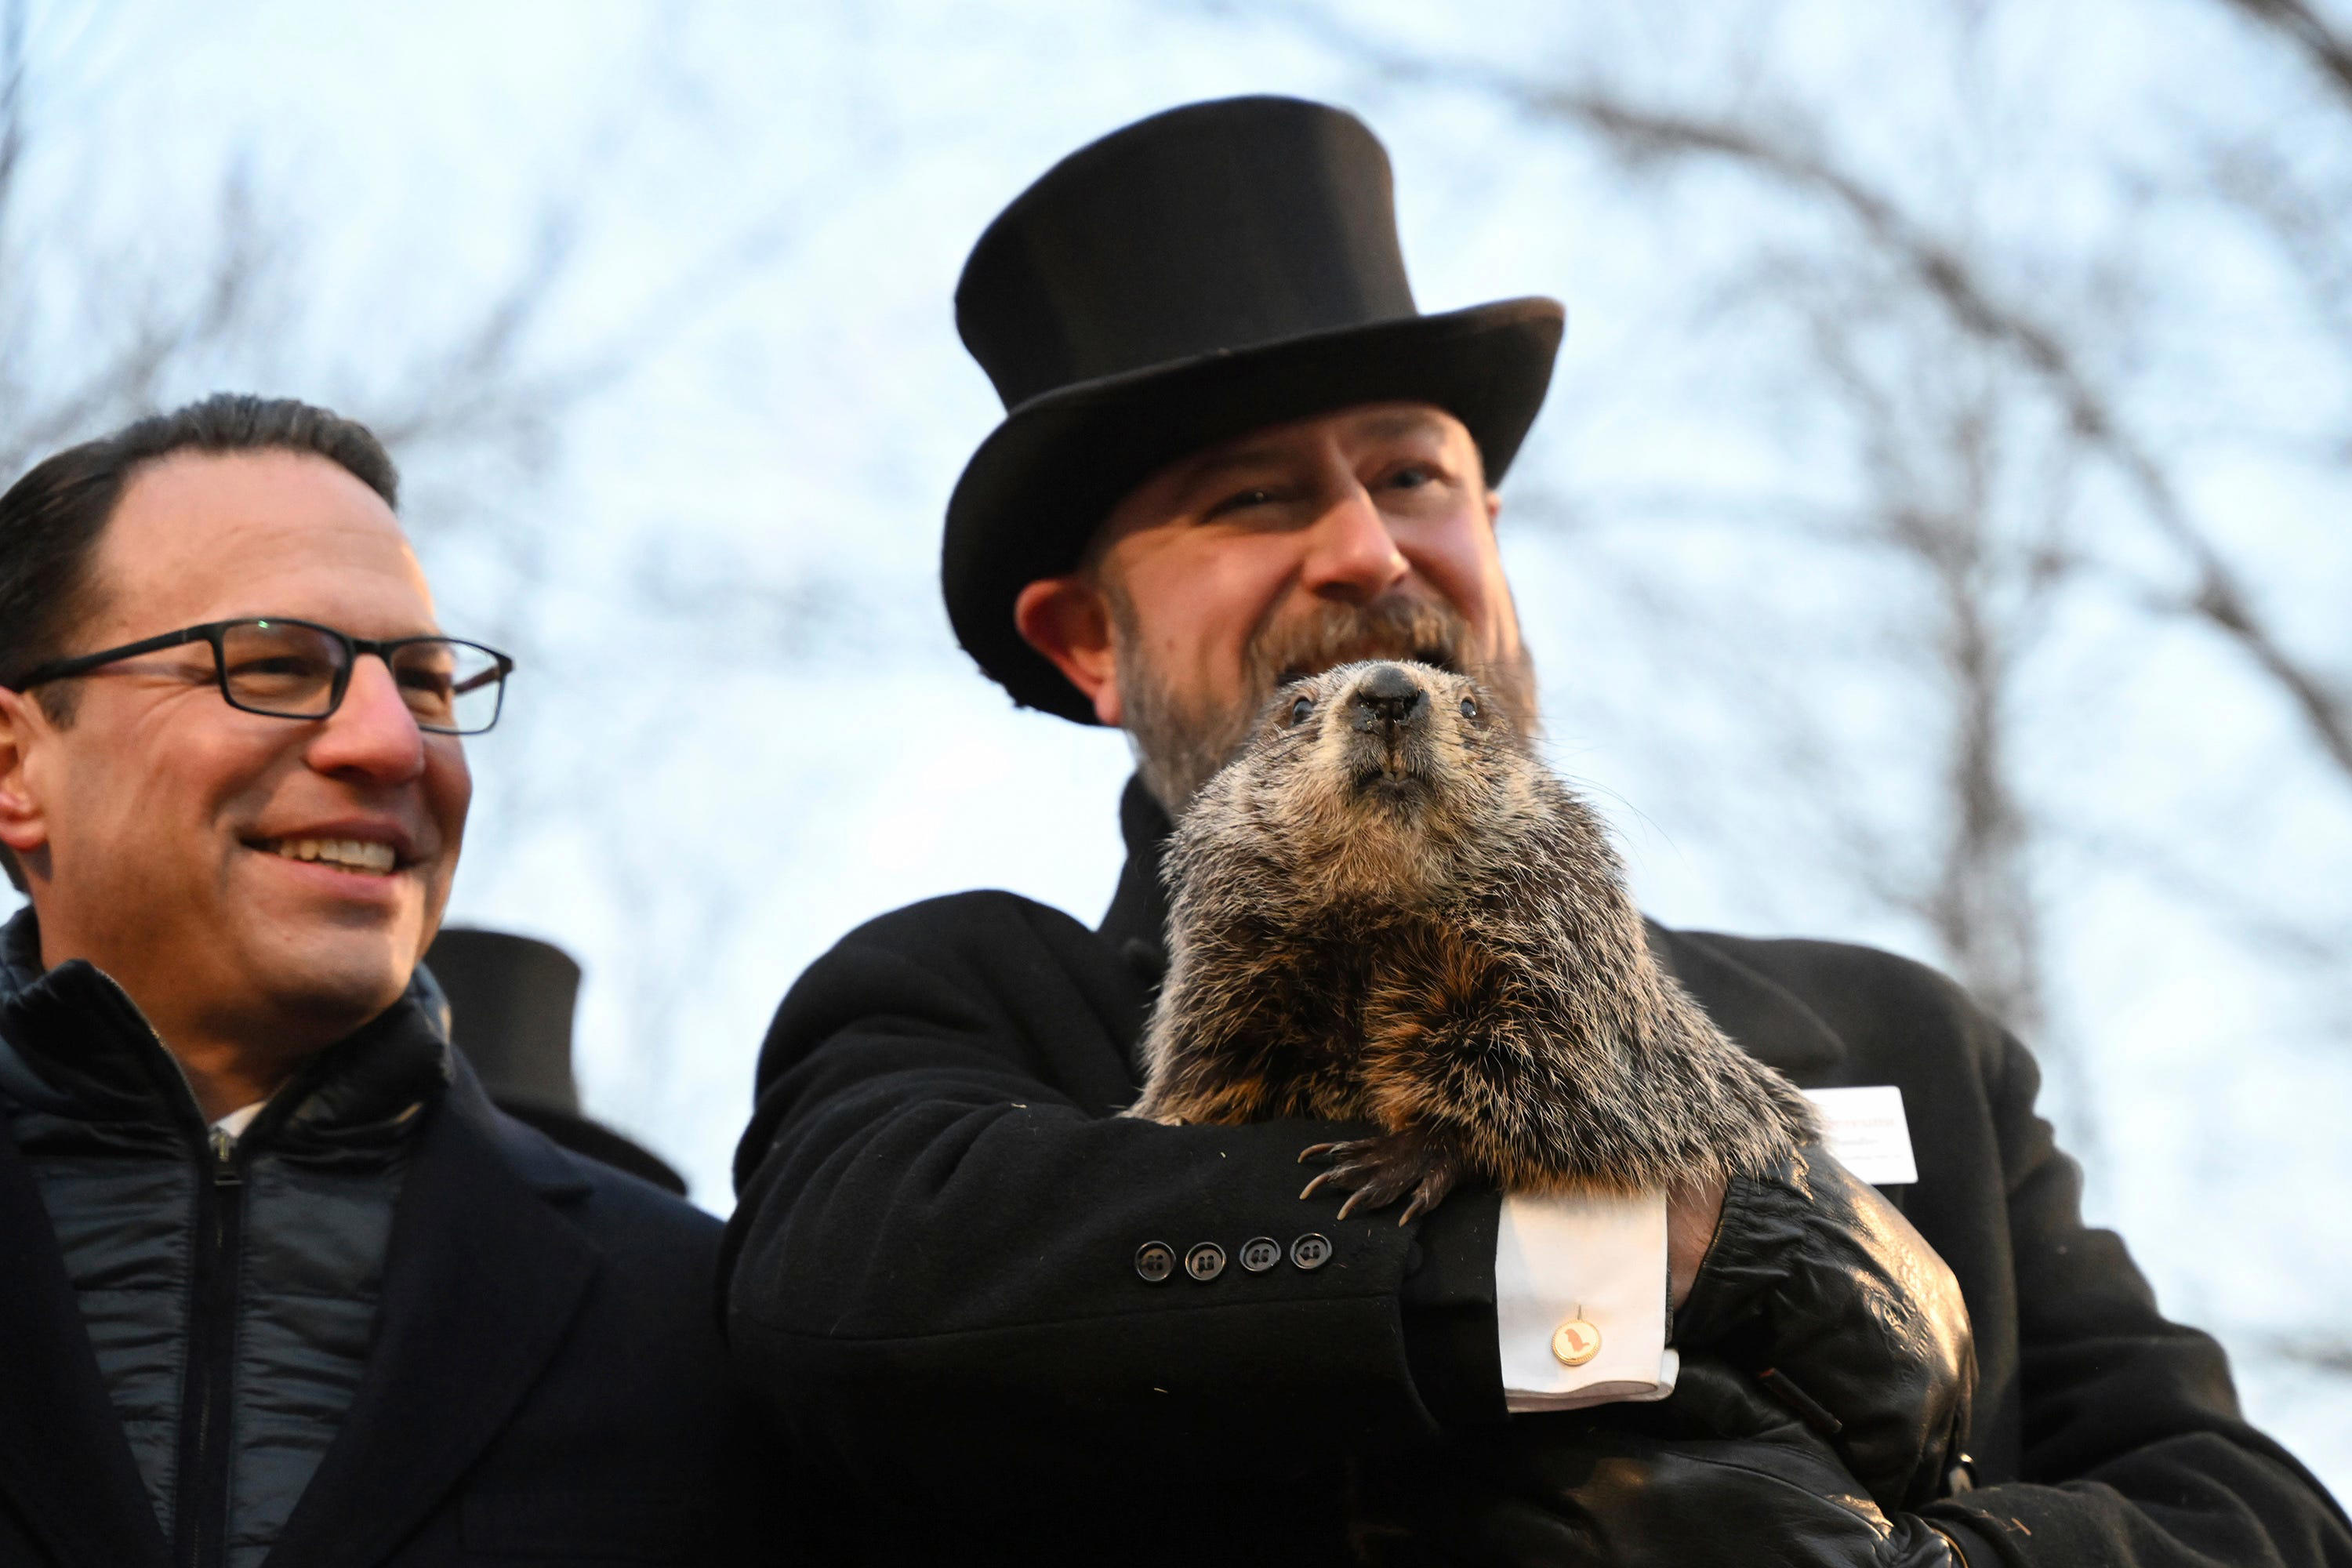 Philing you in Facts about Groundhog Day in Punxsutawney